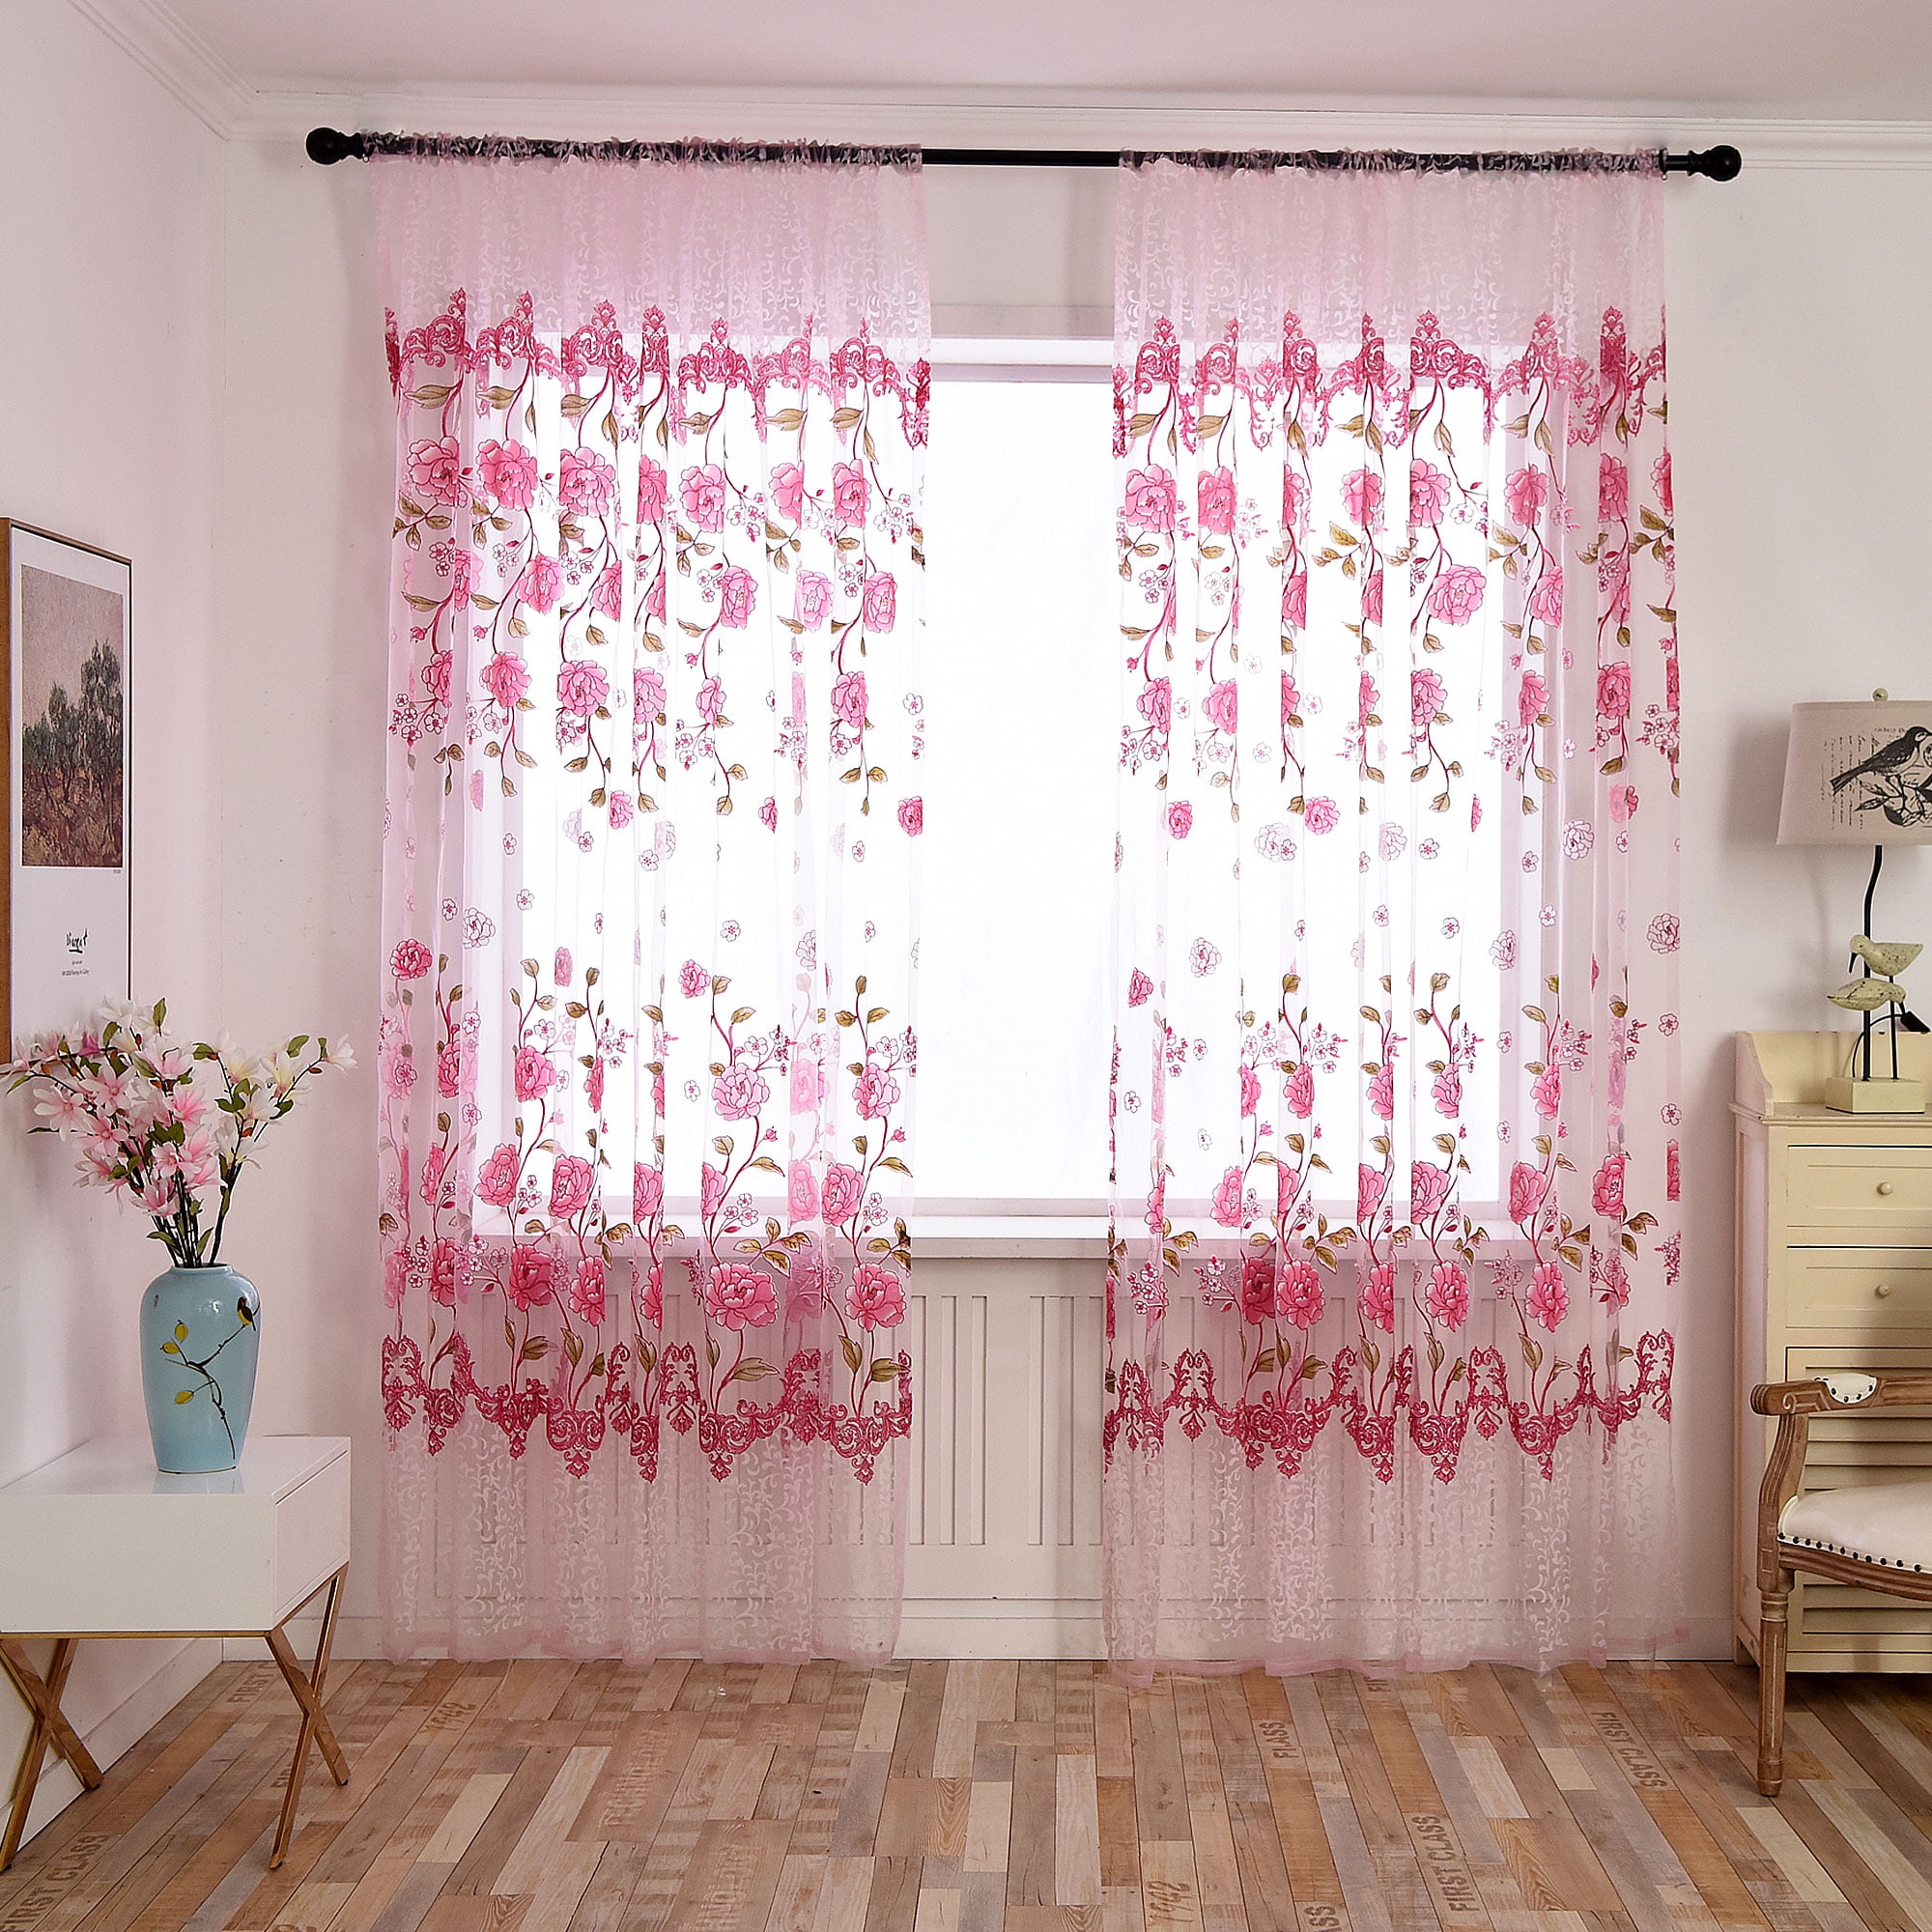 Floral Sheer Curtains Door Tulle Panels Voile Scarf Drape Valance Bedroom 